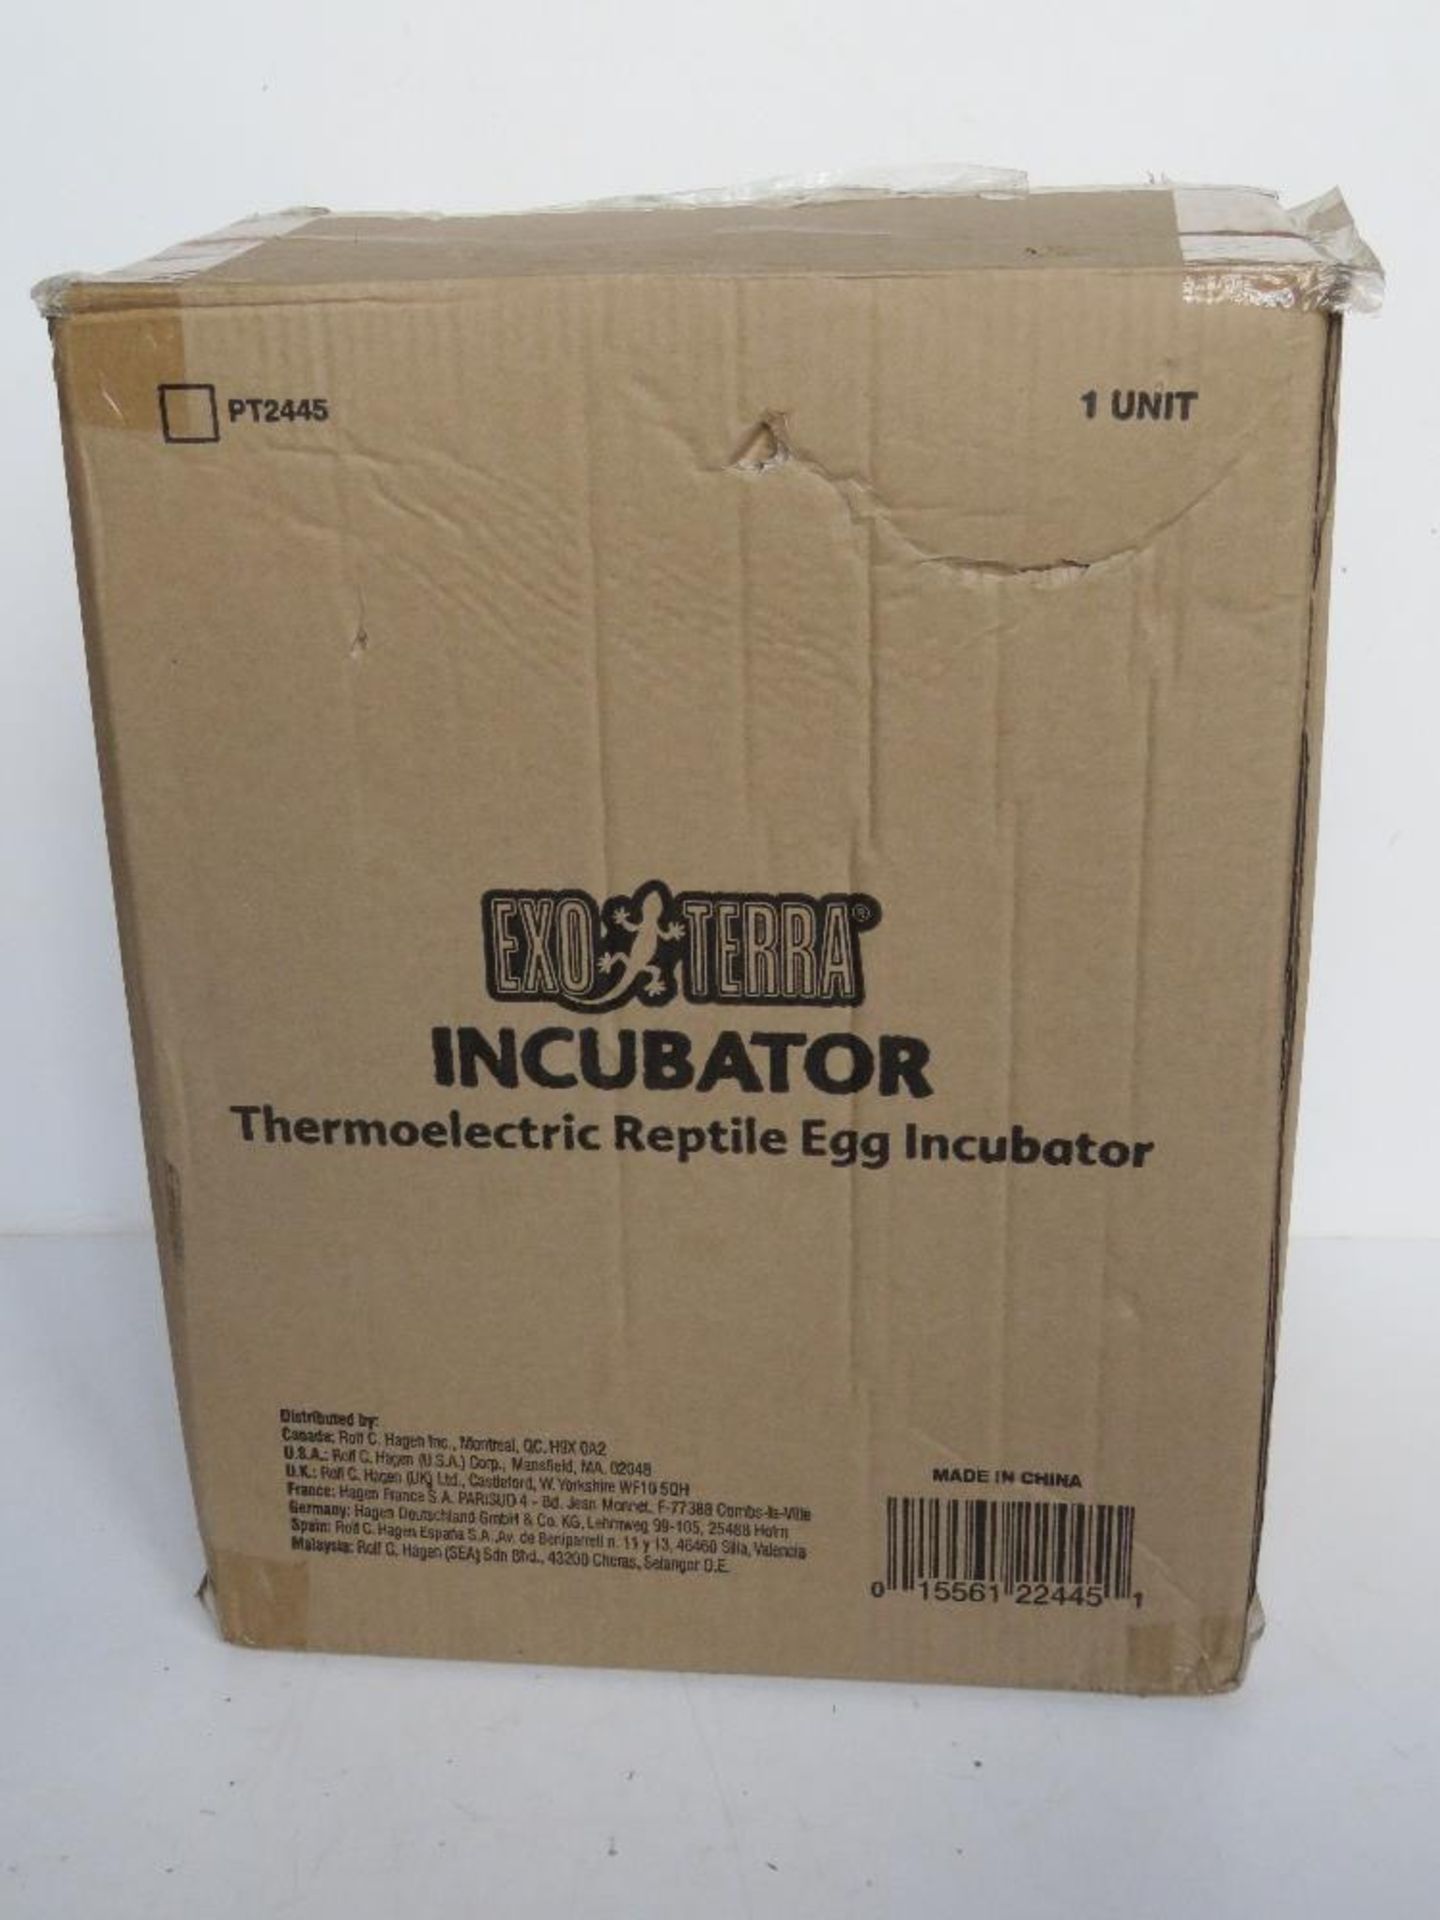 An Exoterra thermoelectric reptile egg incubation, as new in box.